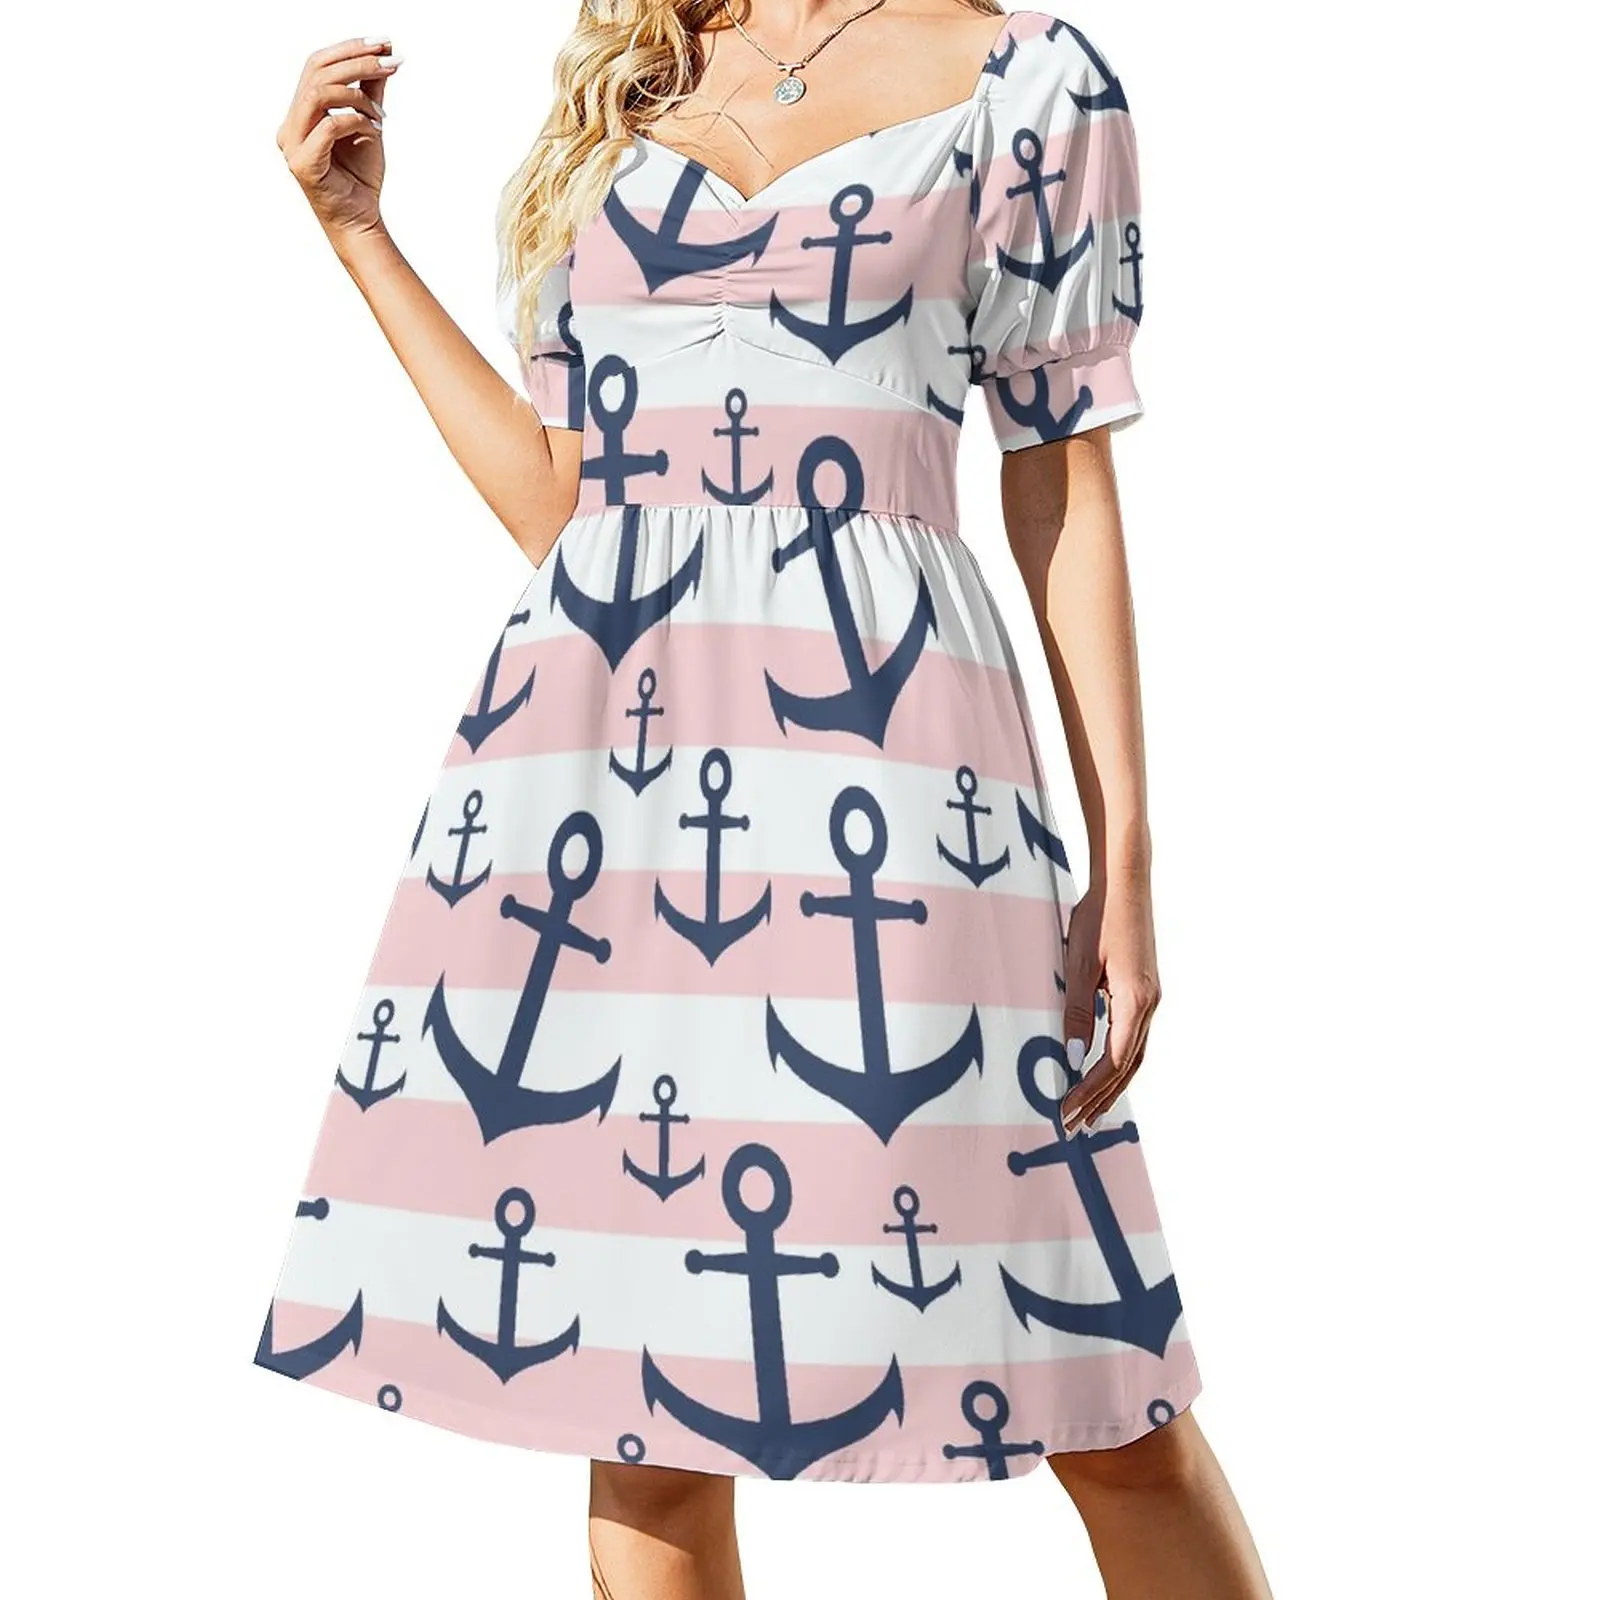 

Nautical pink stripe navy blue anchor pattern Dress dresses for official occasions summer dresses